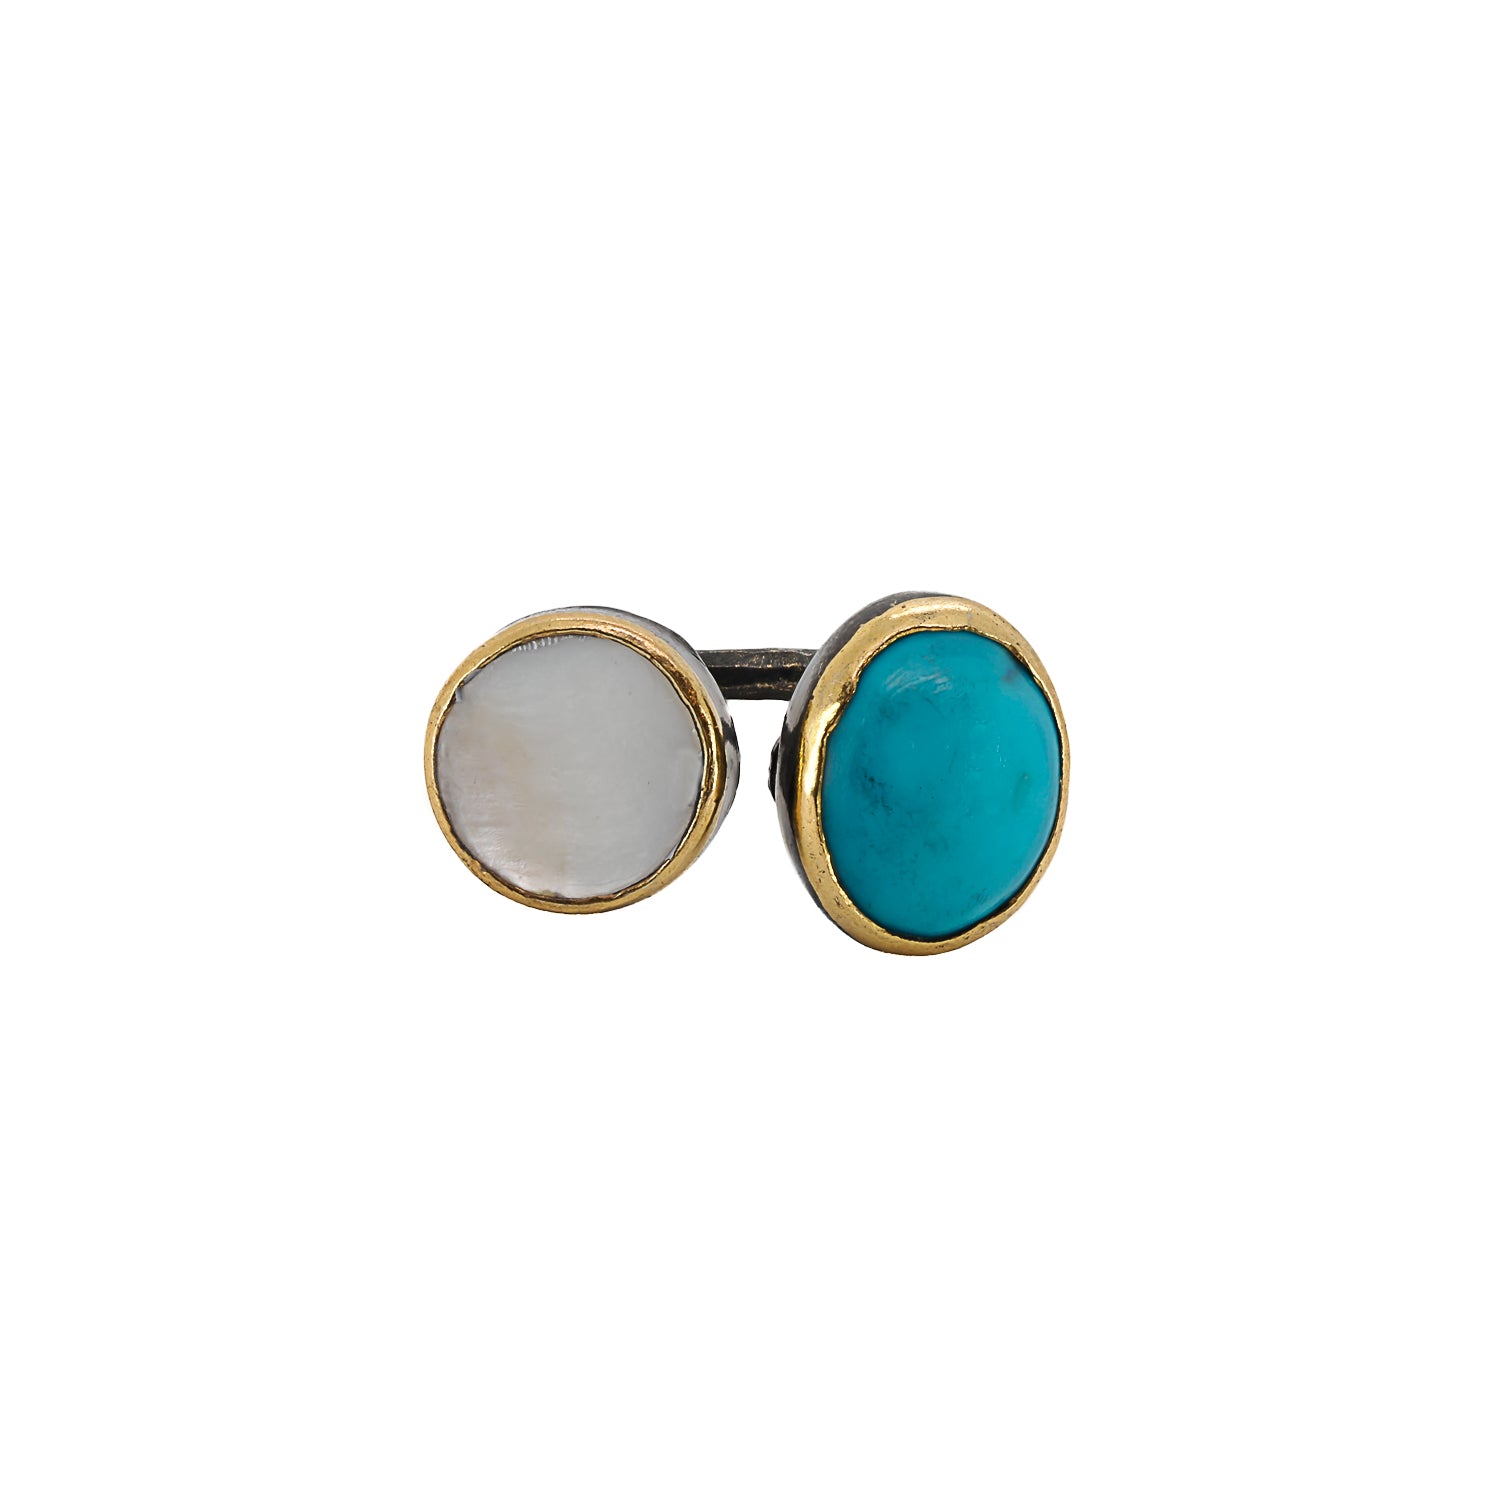 Double Gemstone Sterling Silver Ring showcasing its elegant Pearl and Turquoise pairing.